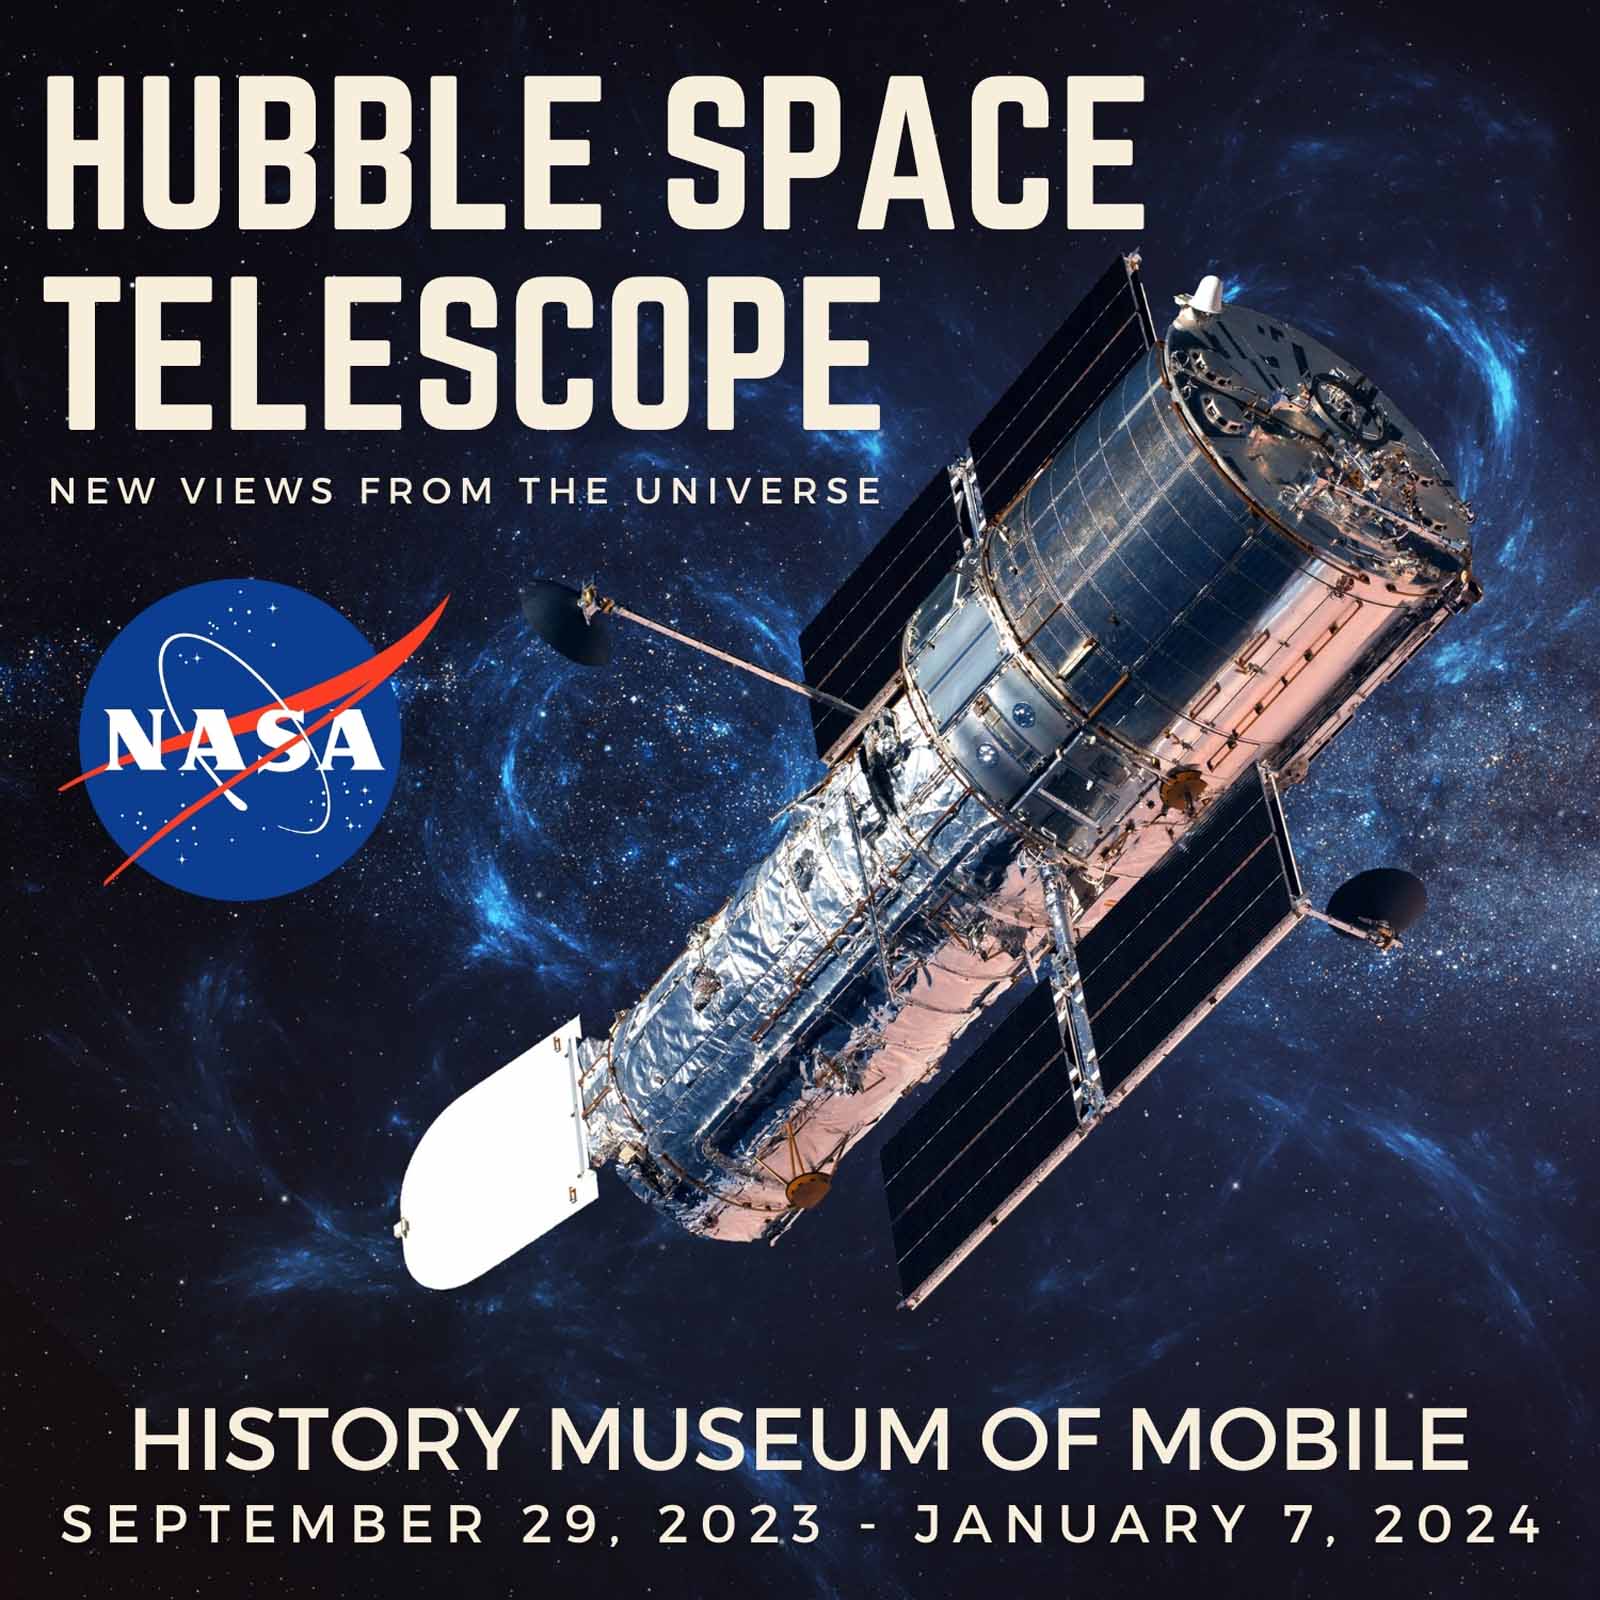 Hubble Exhibit Coming To History Museum Of Mobile